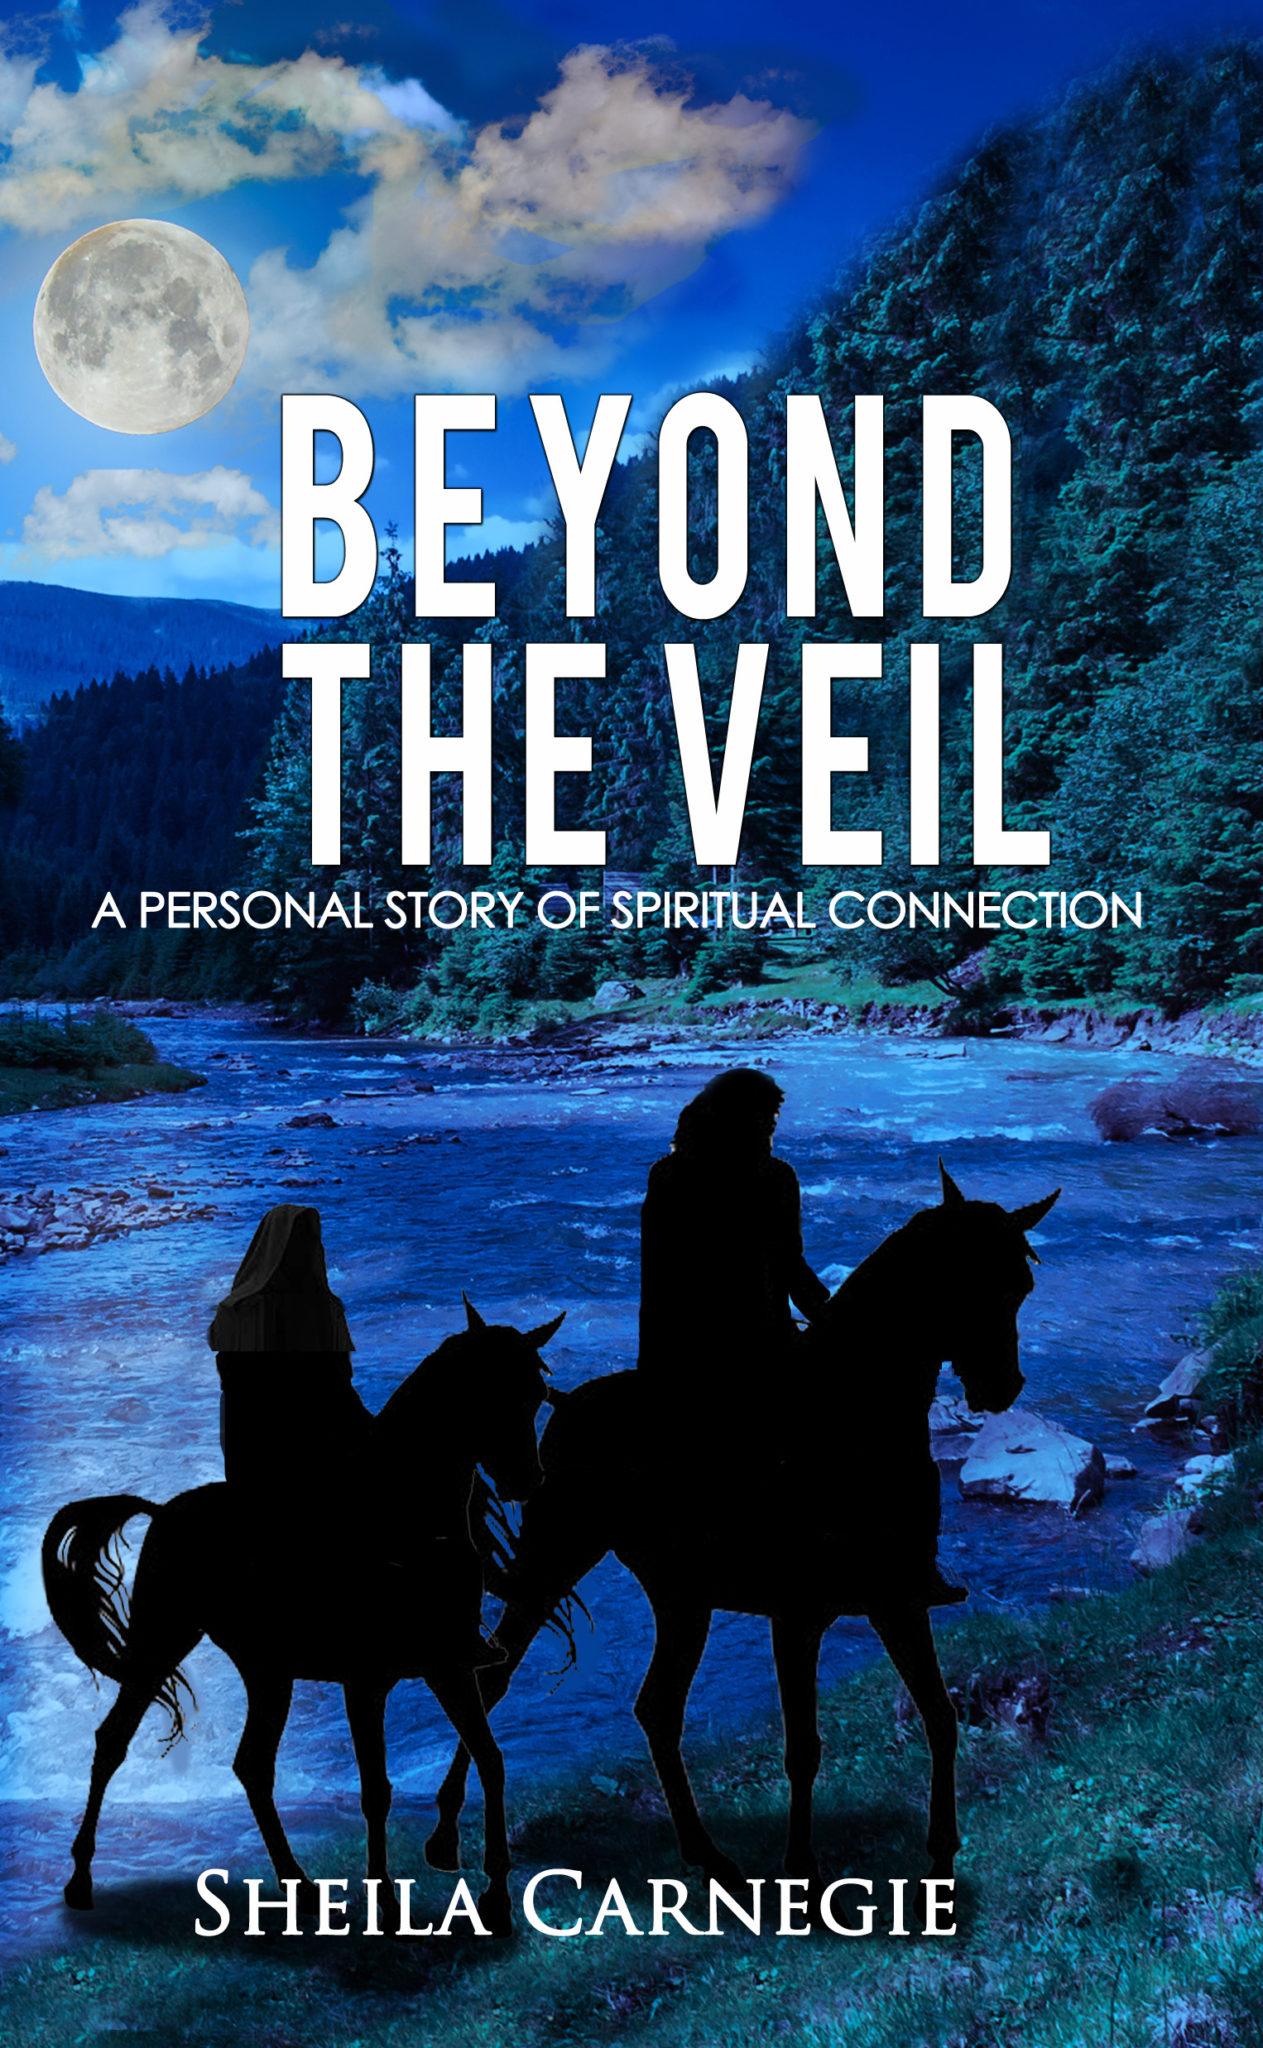 Beyond the Veil: A Personal Story of Spiritual Connection by Sheila Carnegie by Sheila Carnegie